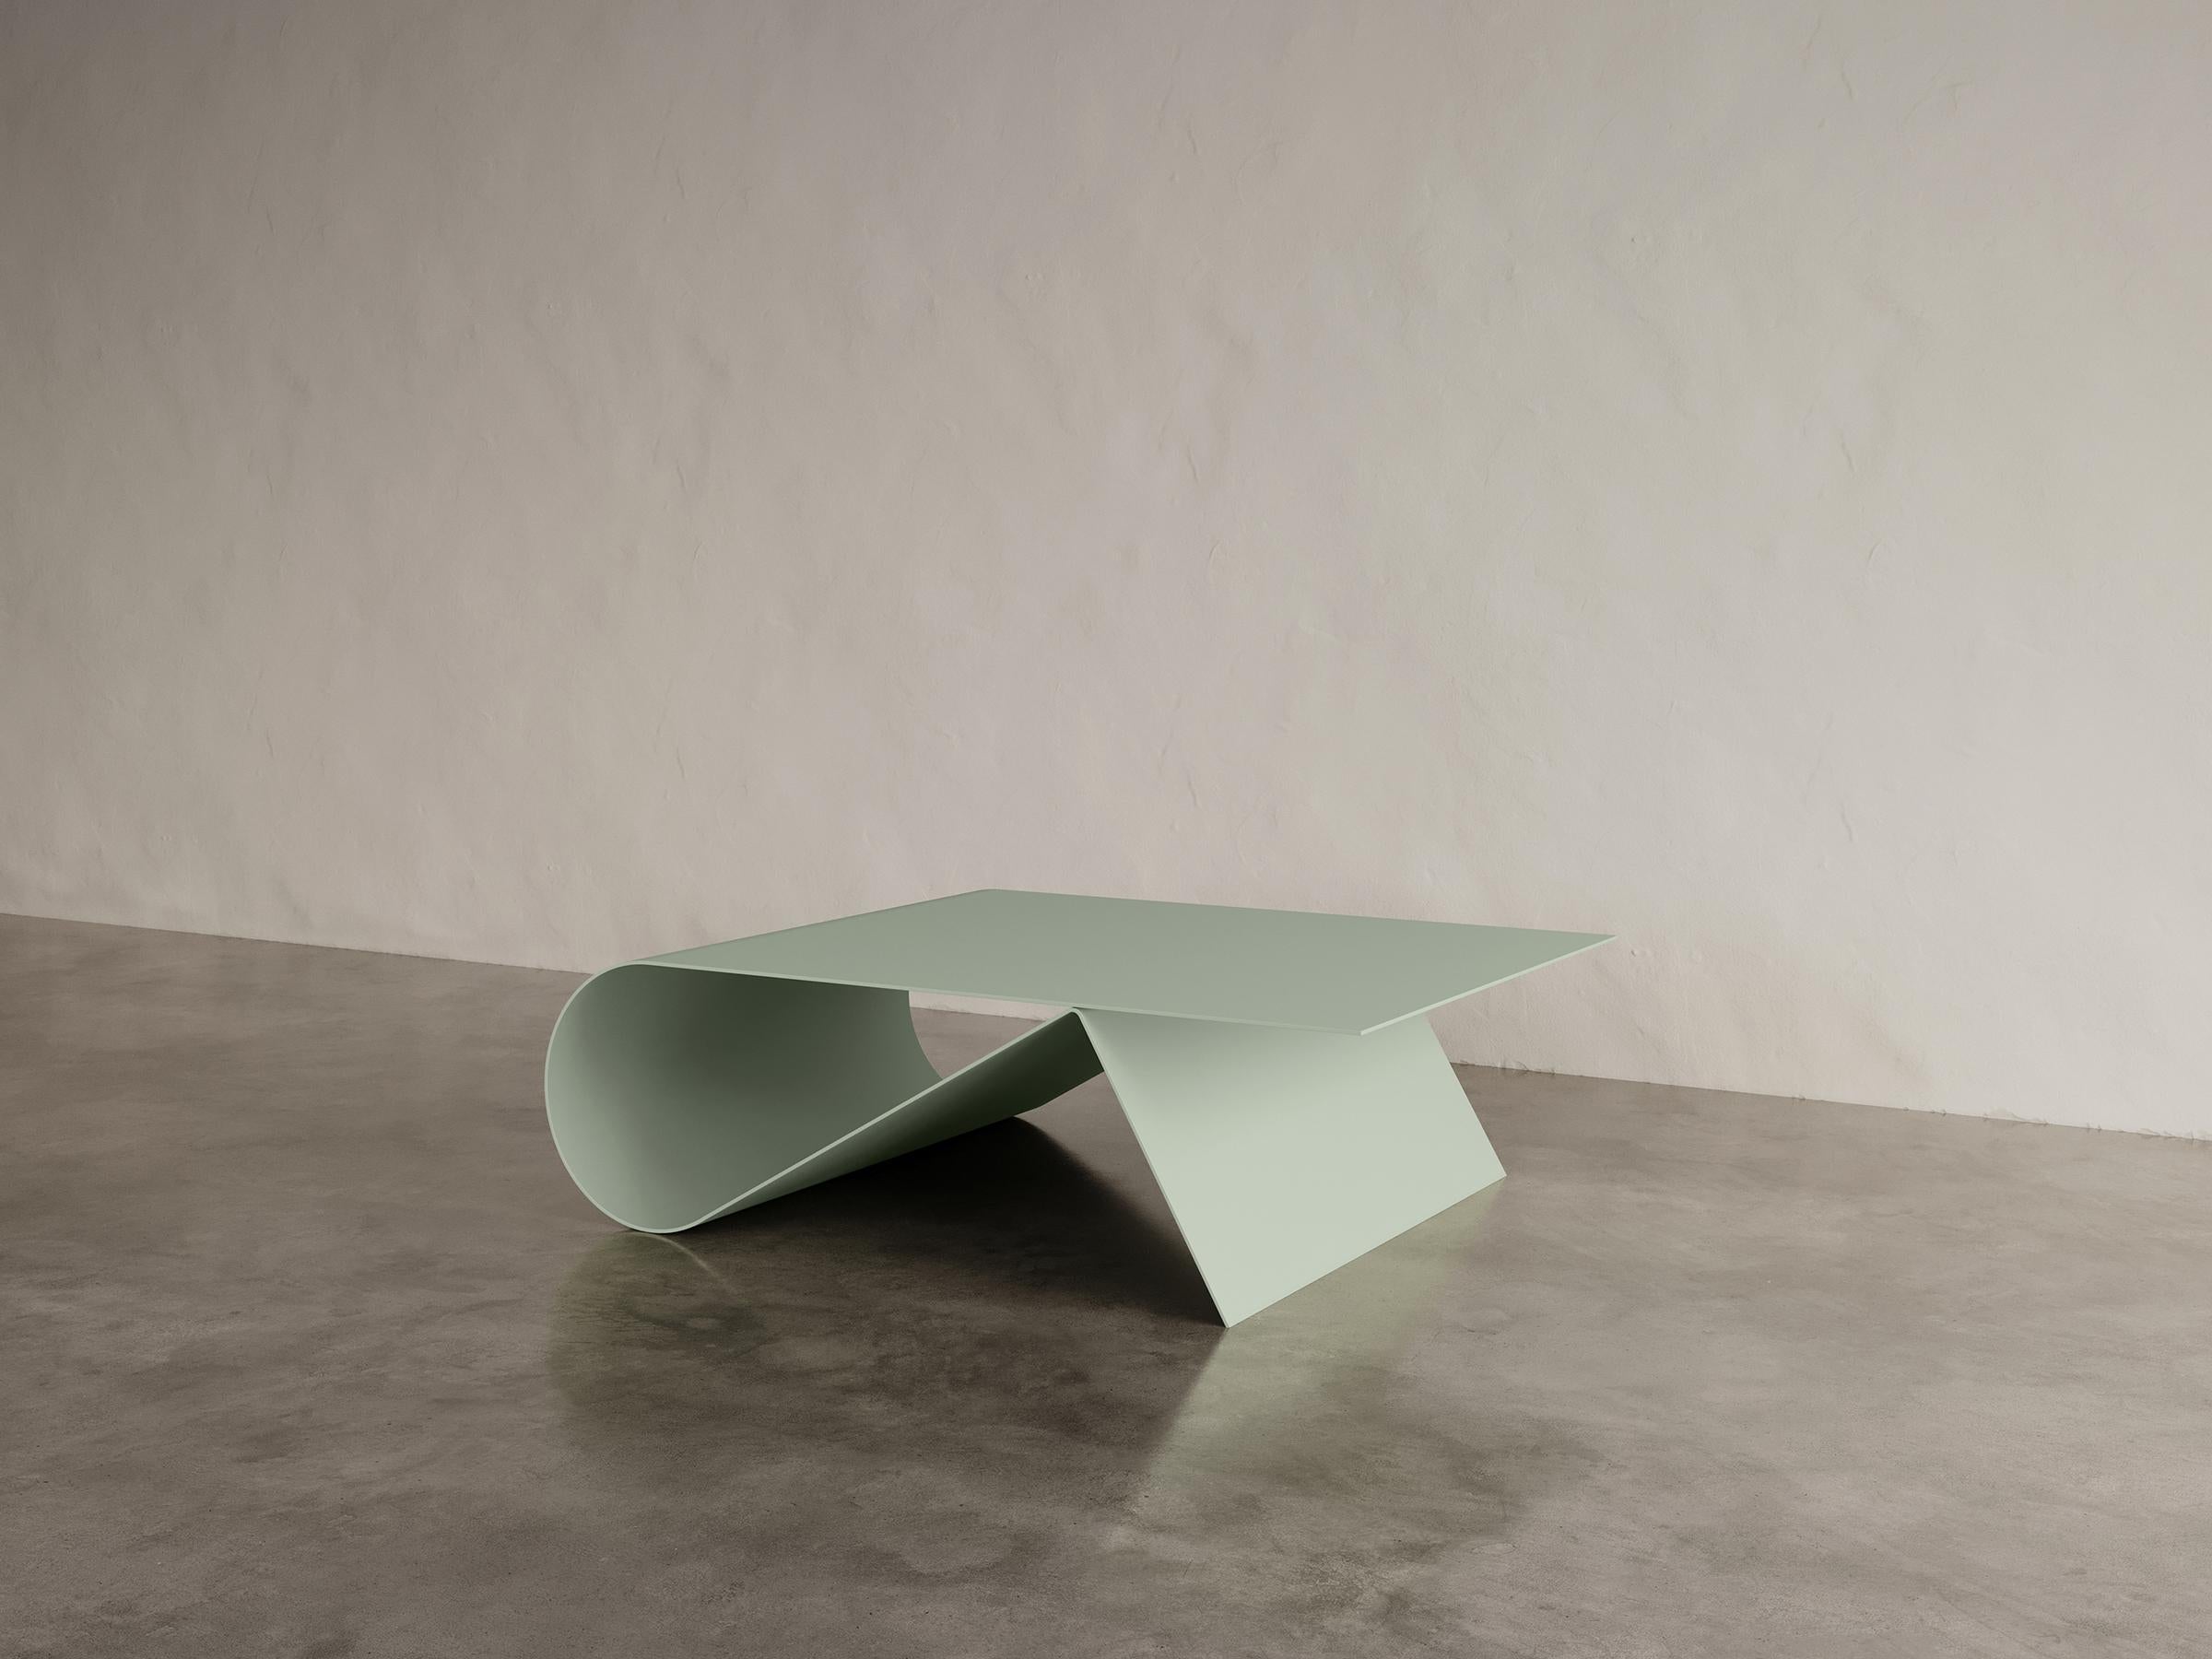 Bent Sage Coffee Table by Etamorph
Dimensions: D 70 x W 120 x H 40 cm.
Materials: Powder-coated carbon steel.

Custom RAL colors available on demand. Please contact us. 

ETAMORPH is a NYC-based design boutique studio specializing in contemporary